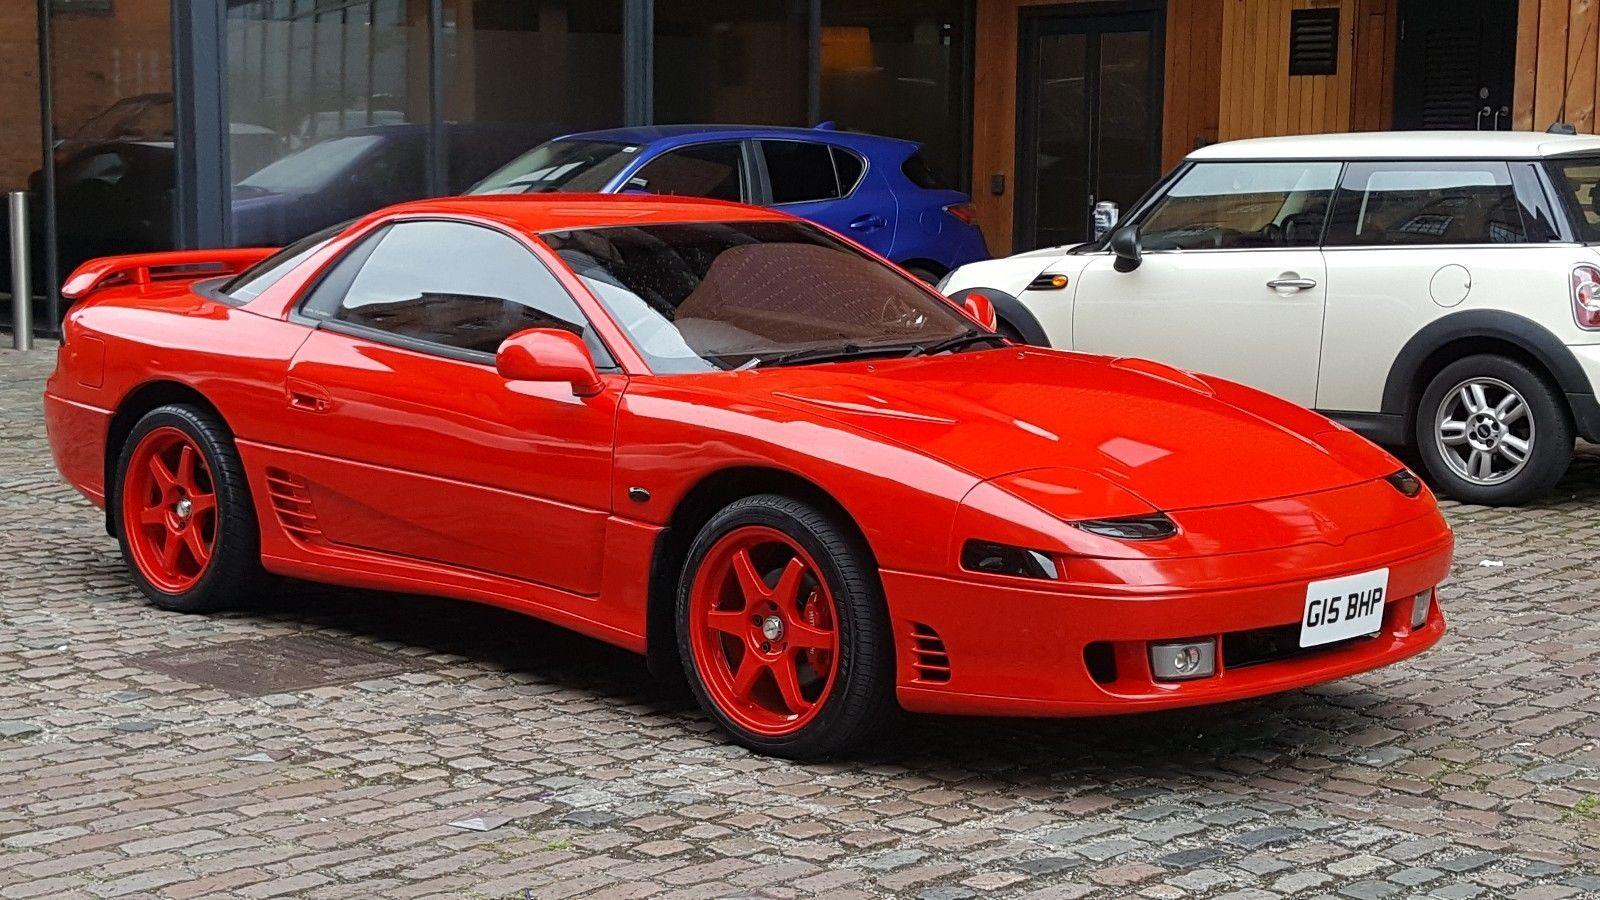 Click the link to see more of this mitsubishi gto 3000gt twin turbo